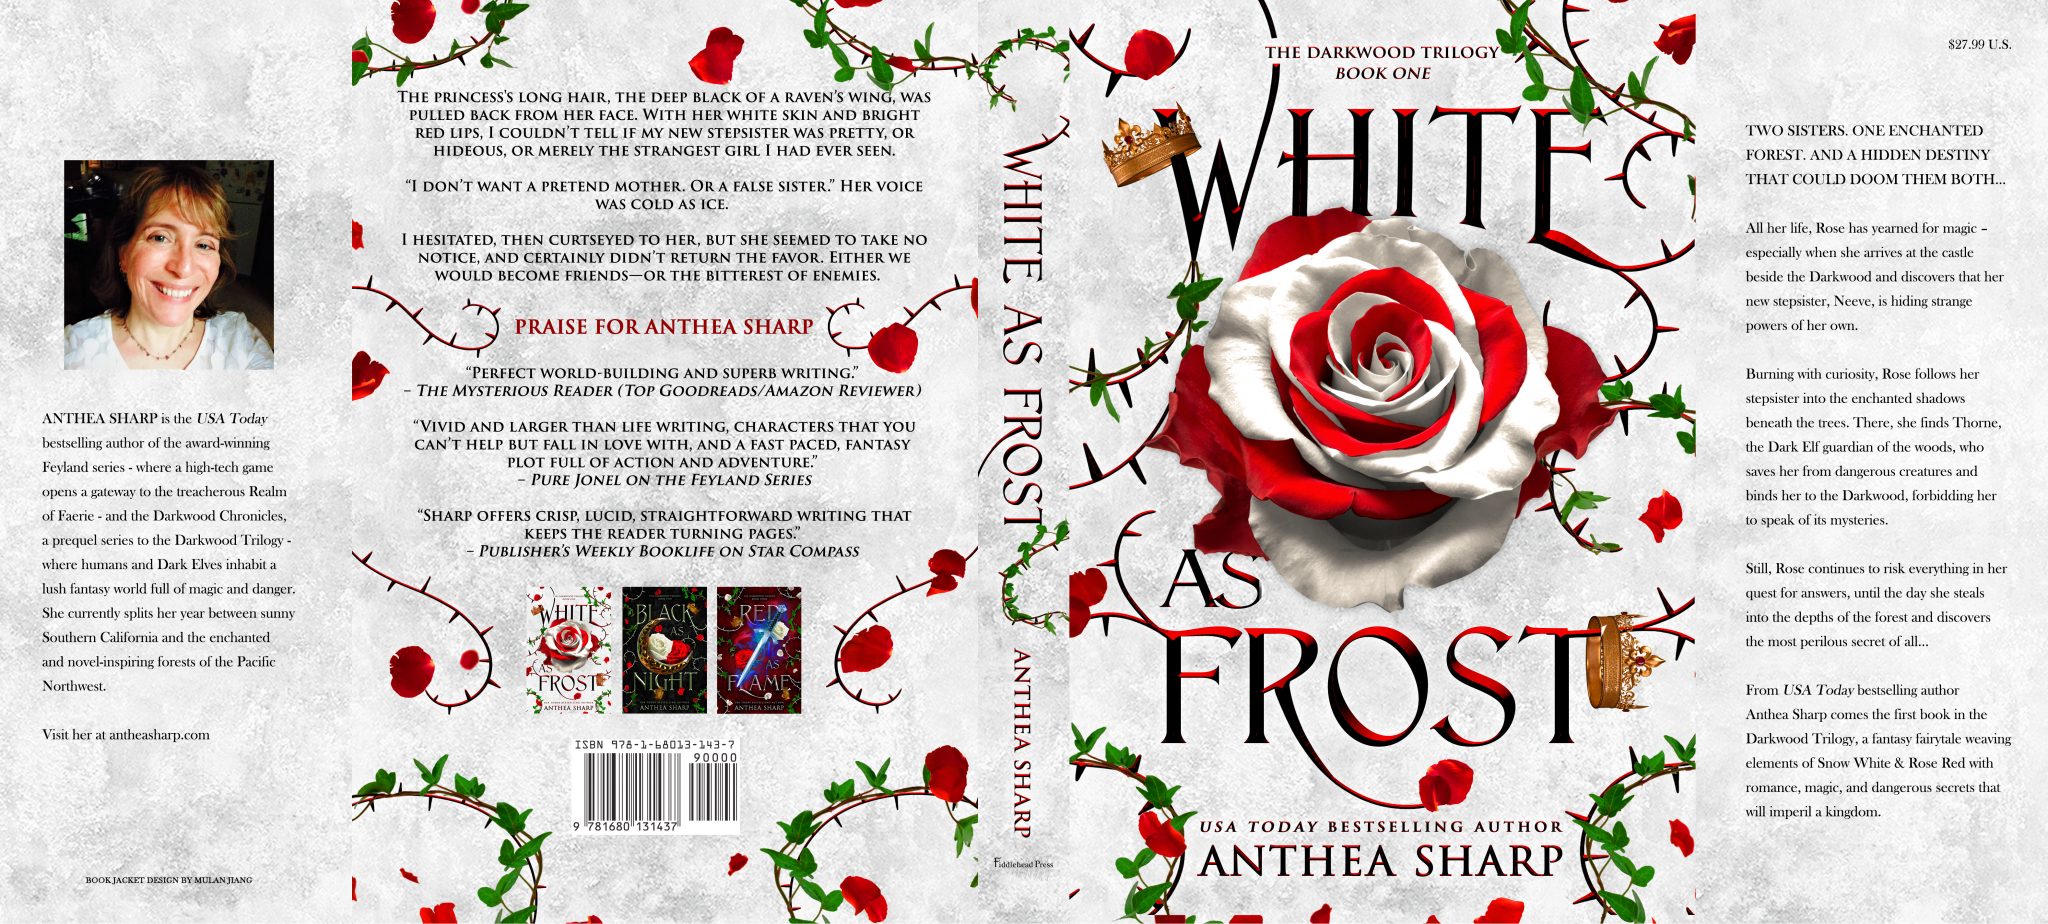 White as Frost by Anthea Sharp wrap around